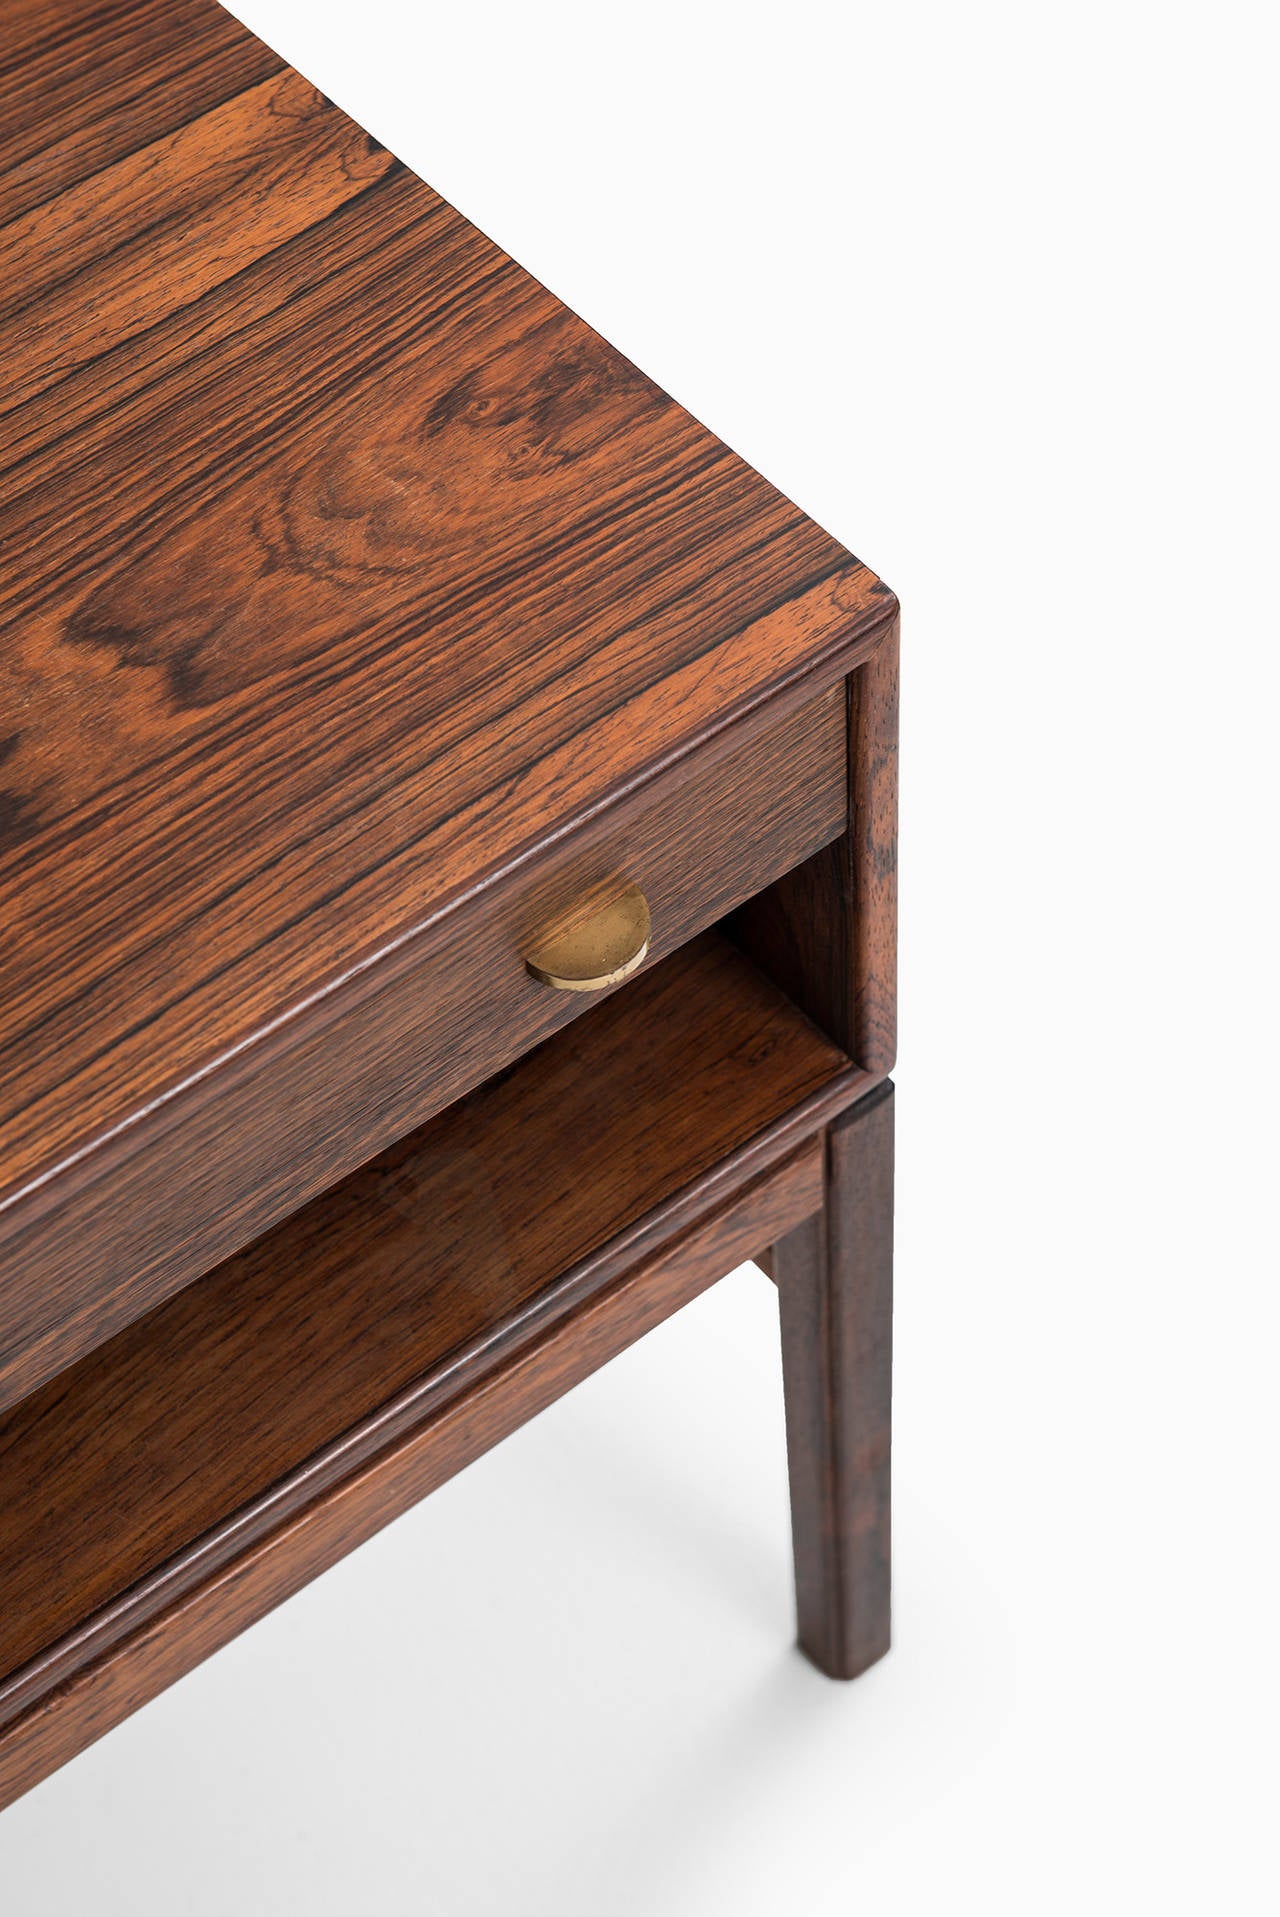 A pair of freestanding side or bedside tables in rosewood and brass designed by Sven Engström & Gunnar Myrstrand. Produced by Tingströms in Sweden.